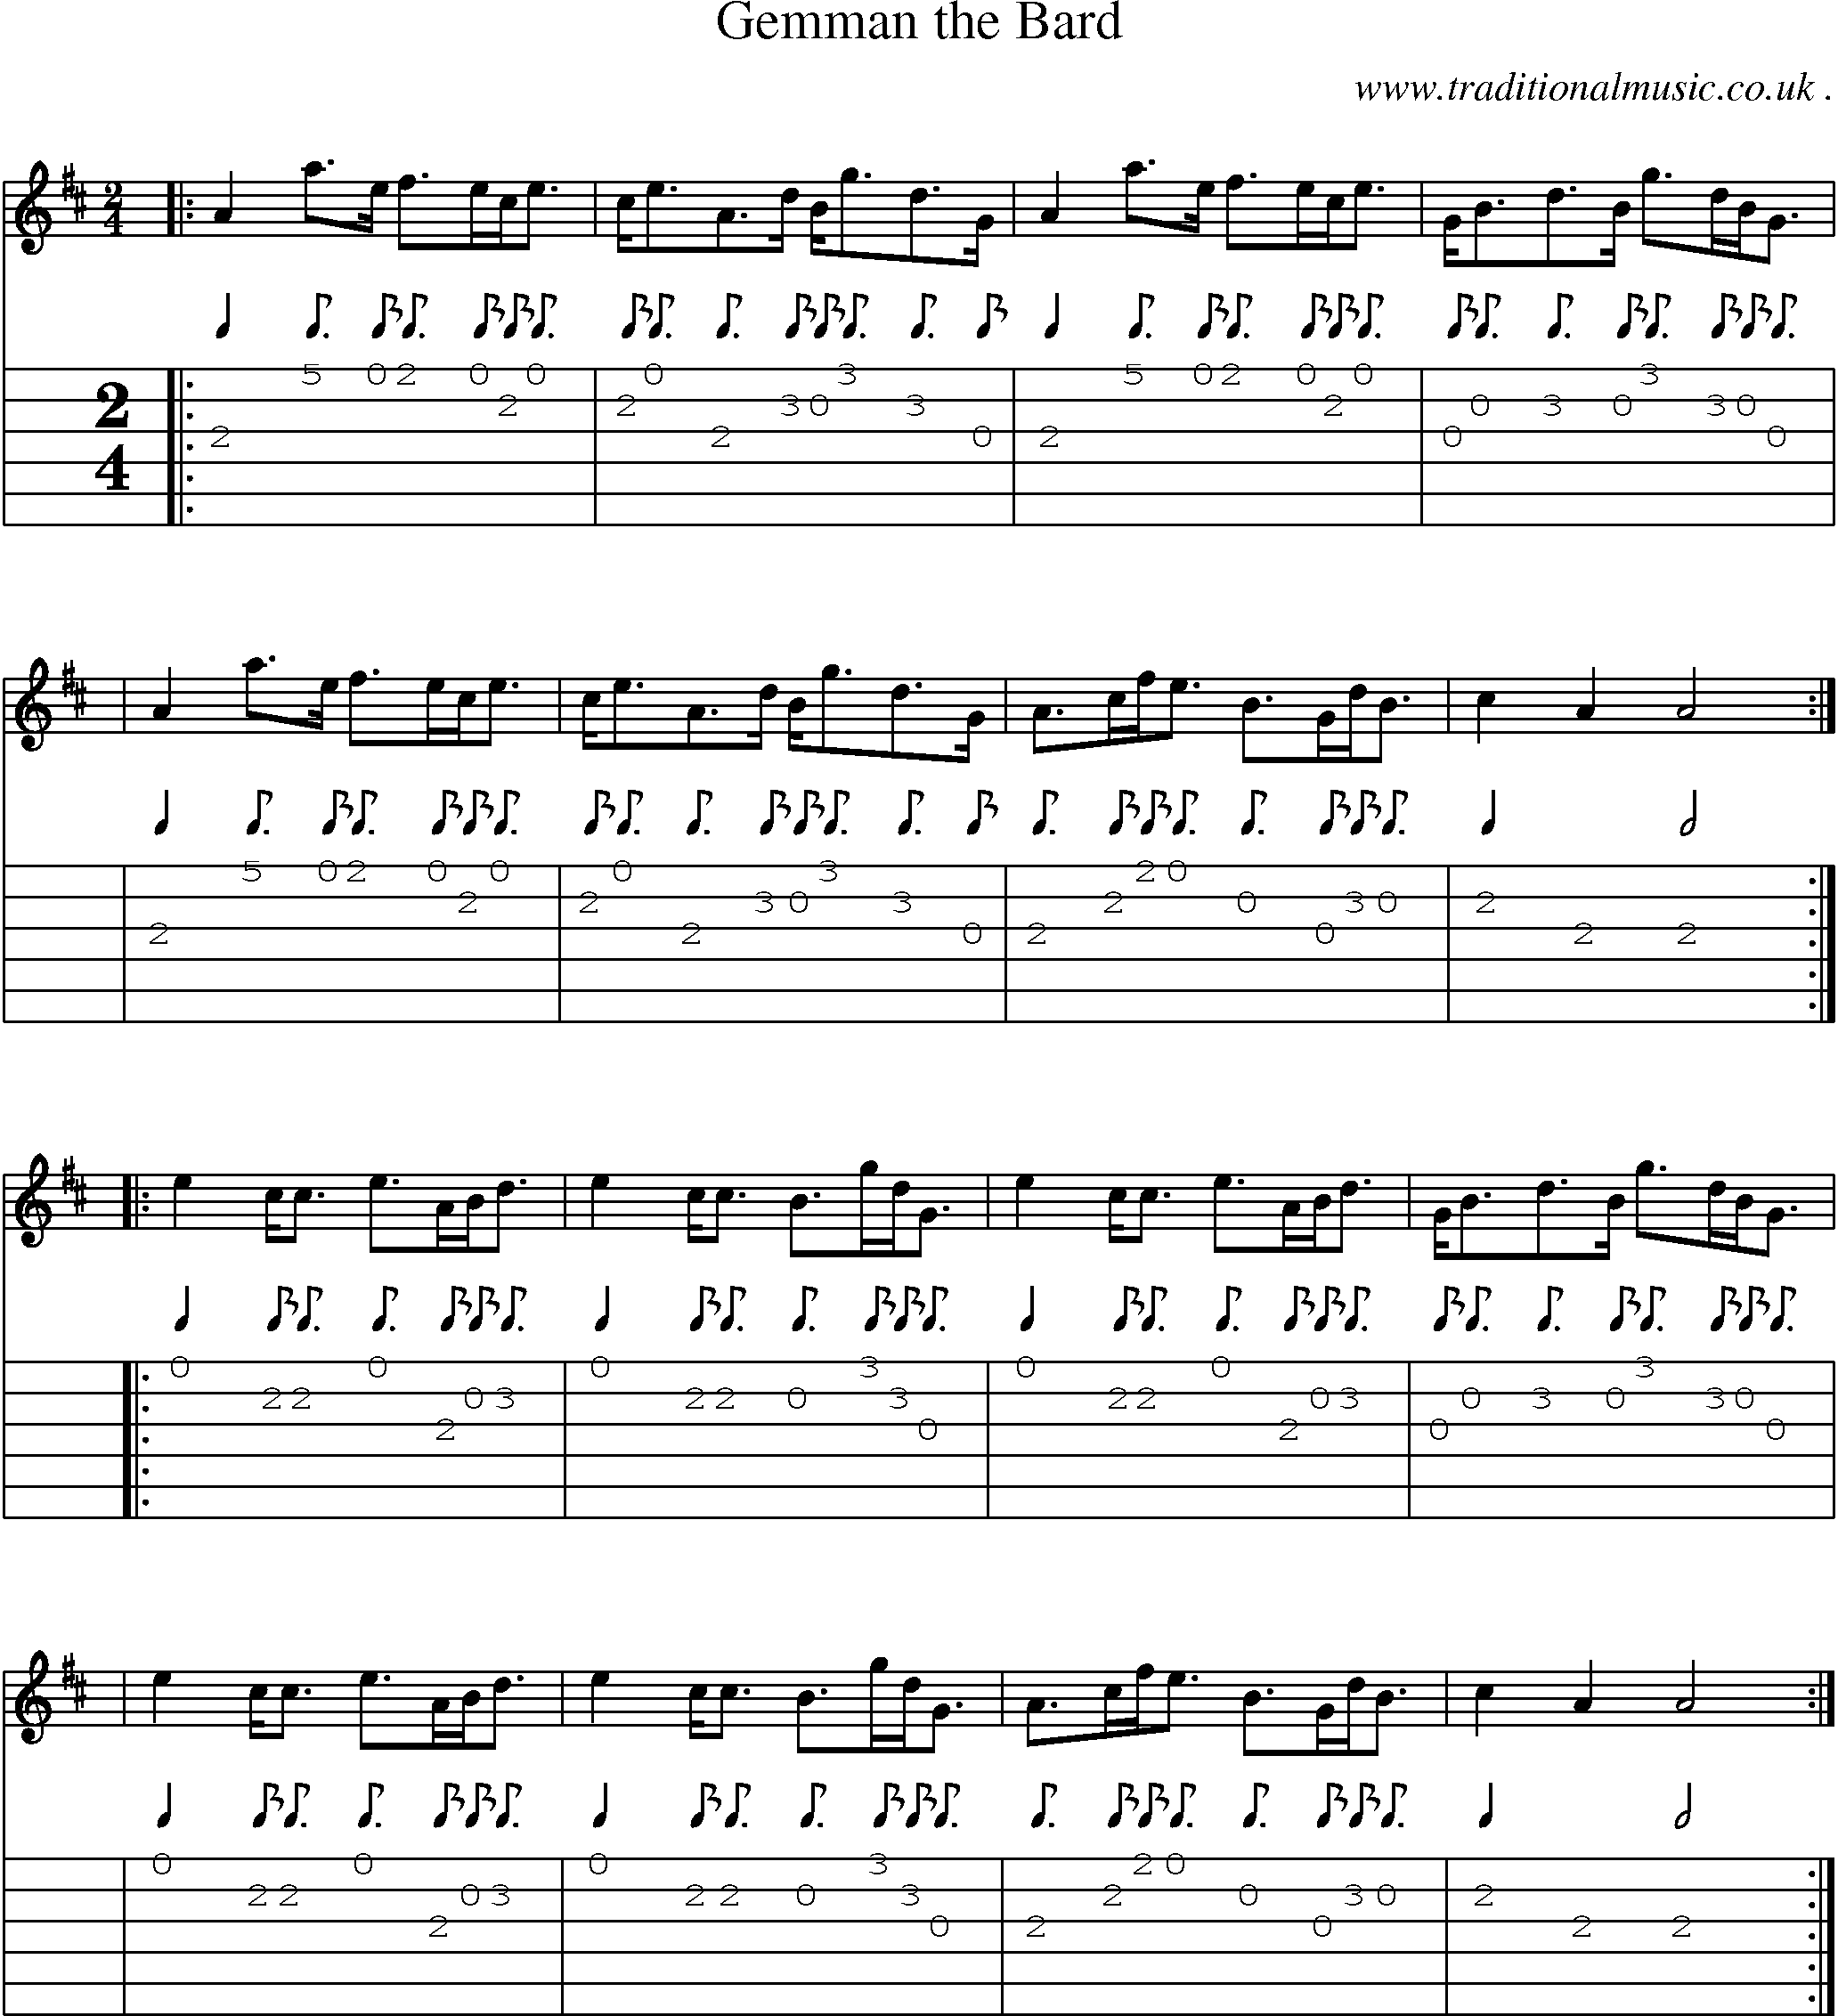 Sheet-Music and Guitar Tabs for Gemman The Bard